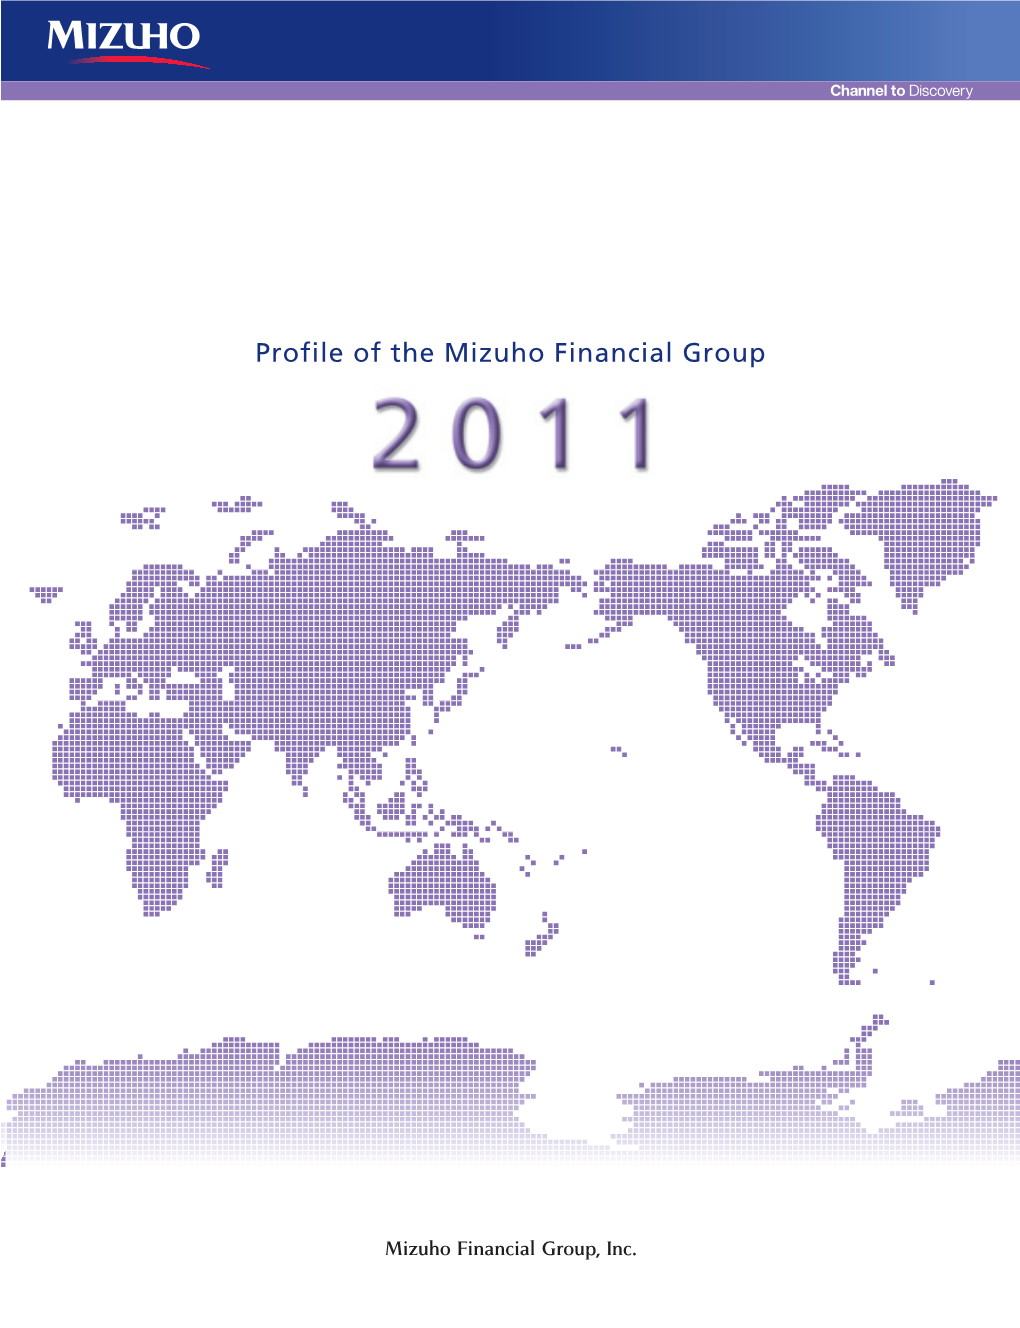 Profile of the Mizuho Financial Group (2011) (PDF/4191KB)